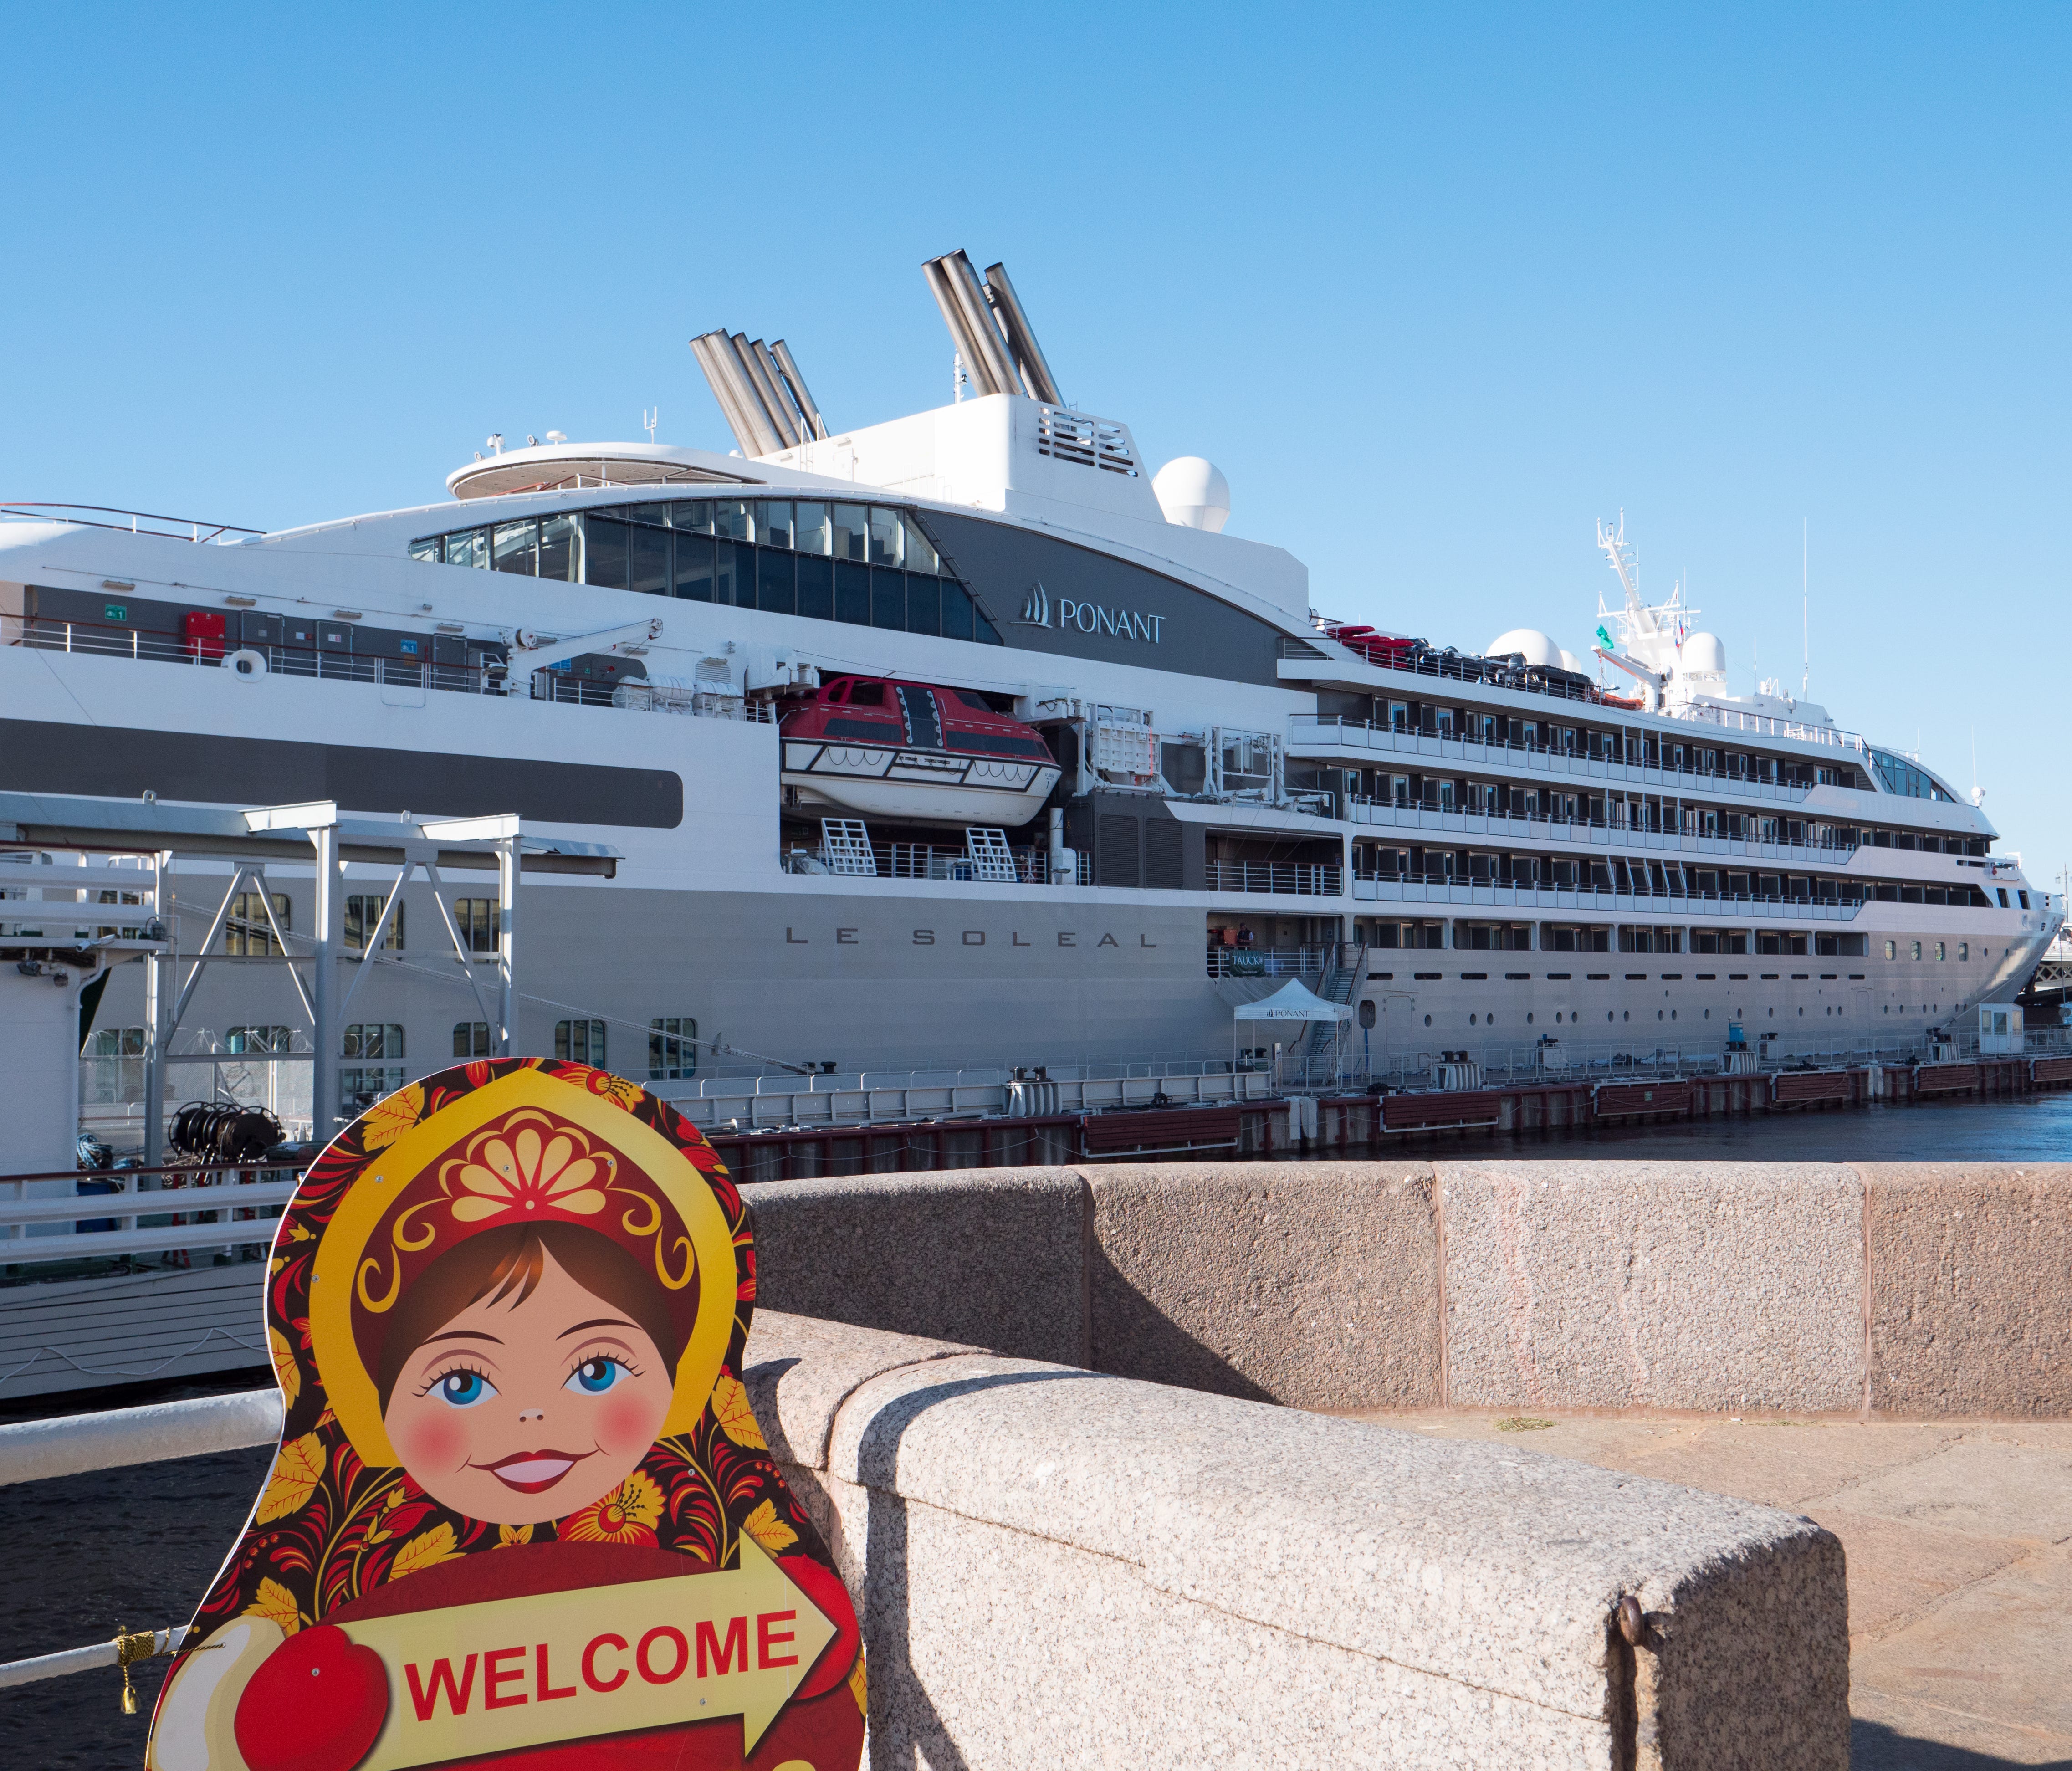 The small size of Ponant's Le Soleal allows the vessel to dock at the center of St. Petersburg along the Neva River.